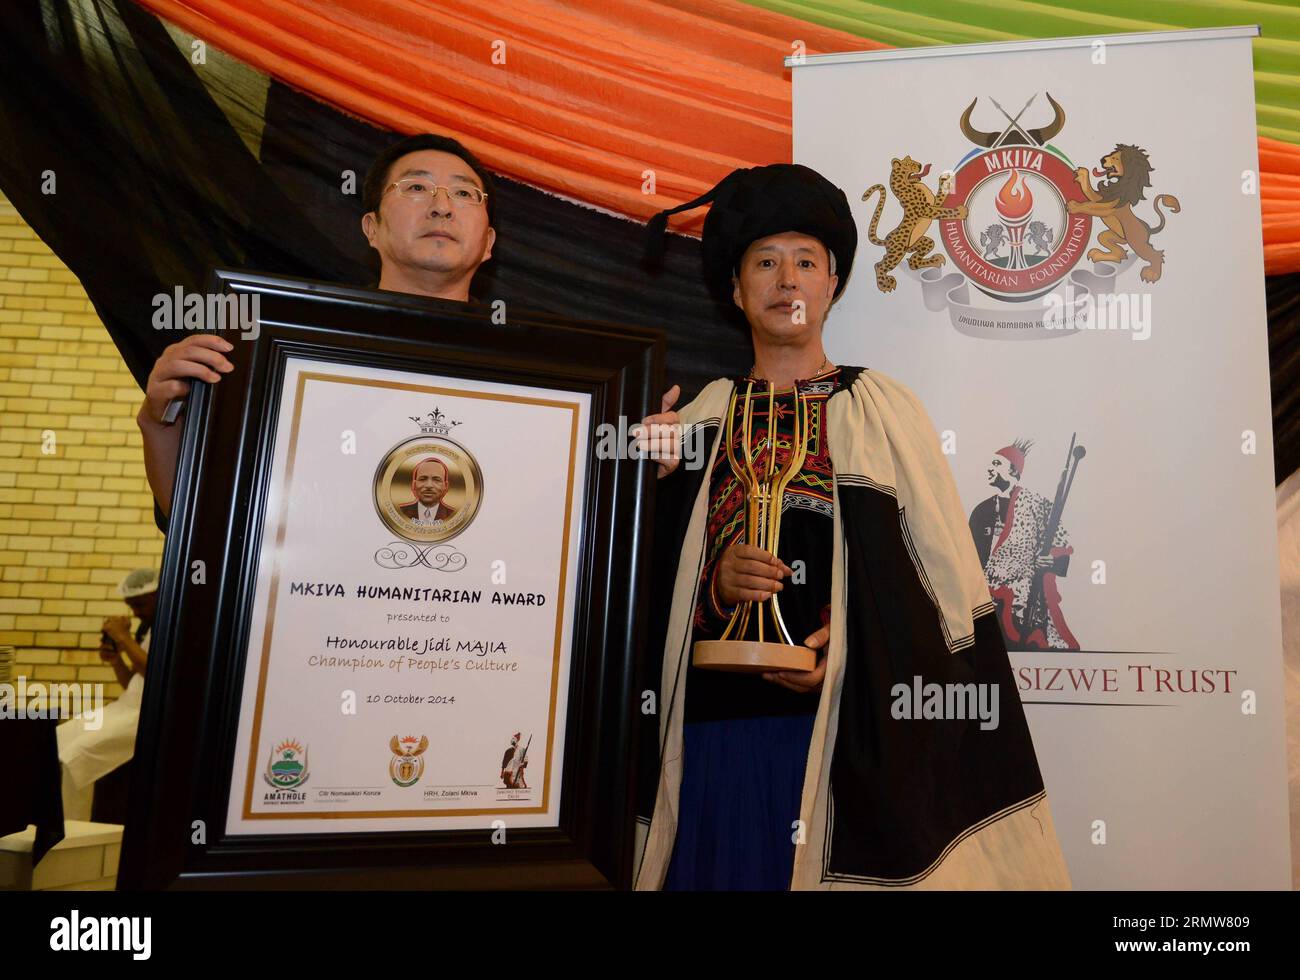 Jike Qubu (R), a student and representive of Jidi Majia who is a Chinese poet and winner of the 2014 Mkiva Humanitarian Awards, attends the awarding ceremony at Walter Sisulu University Butterworth Campus in Eastern Cape, South Africa, on Oct. 10, 2014. The Mkiva Humanitarian Awards celebrates the efforts and successes of African and International leaders who have made an impact on local or international communities. This year s recipients include: Jidi Majia of China, Saeb Erekat of Palestine, Queen Best Kemigisa of Uganda and Rebecca Malope, Mzimasi Mnguni and Mthetheleli NgumbelaThe of Sout Stock Photo